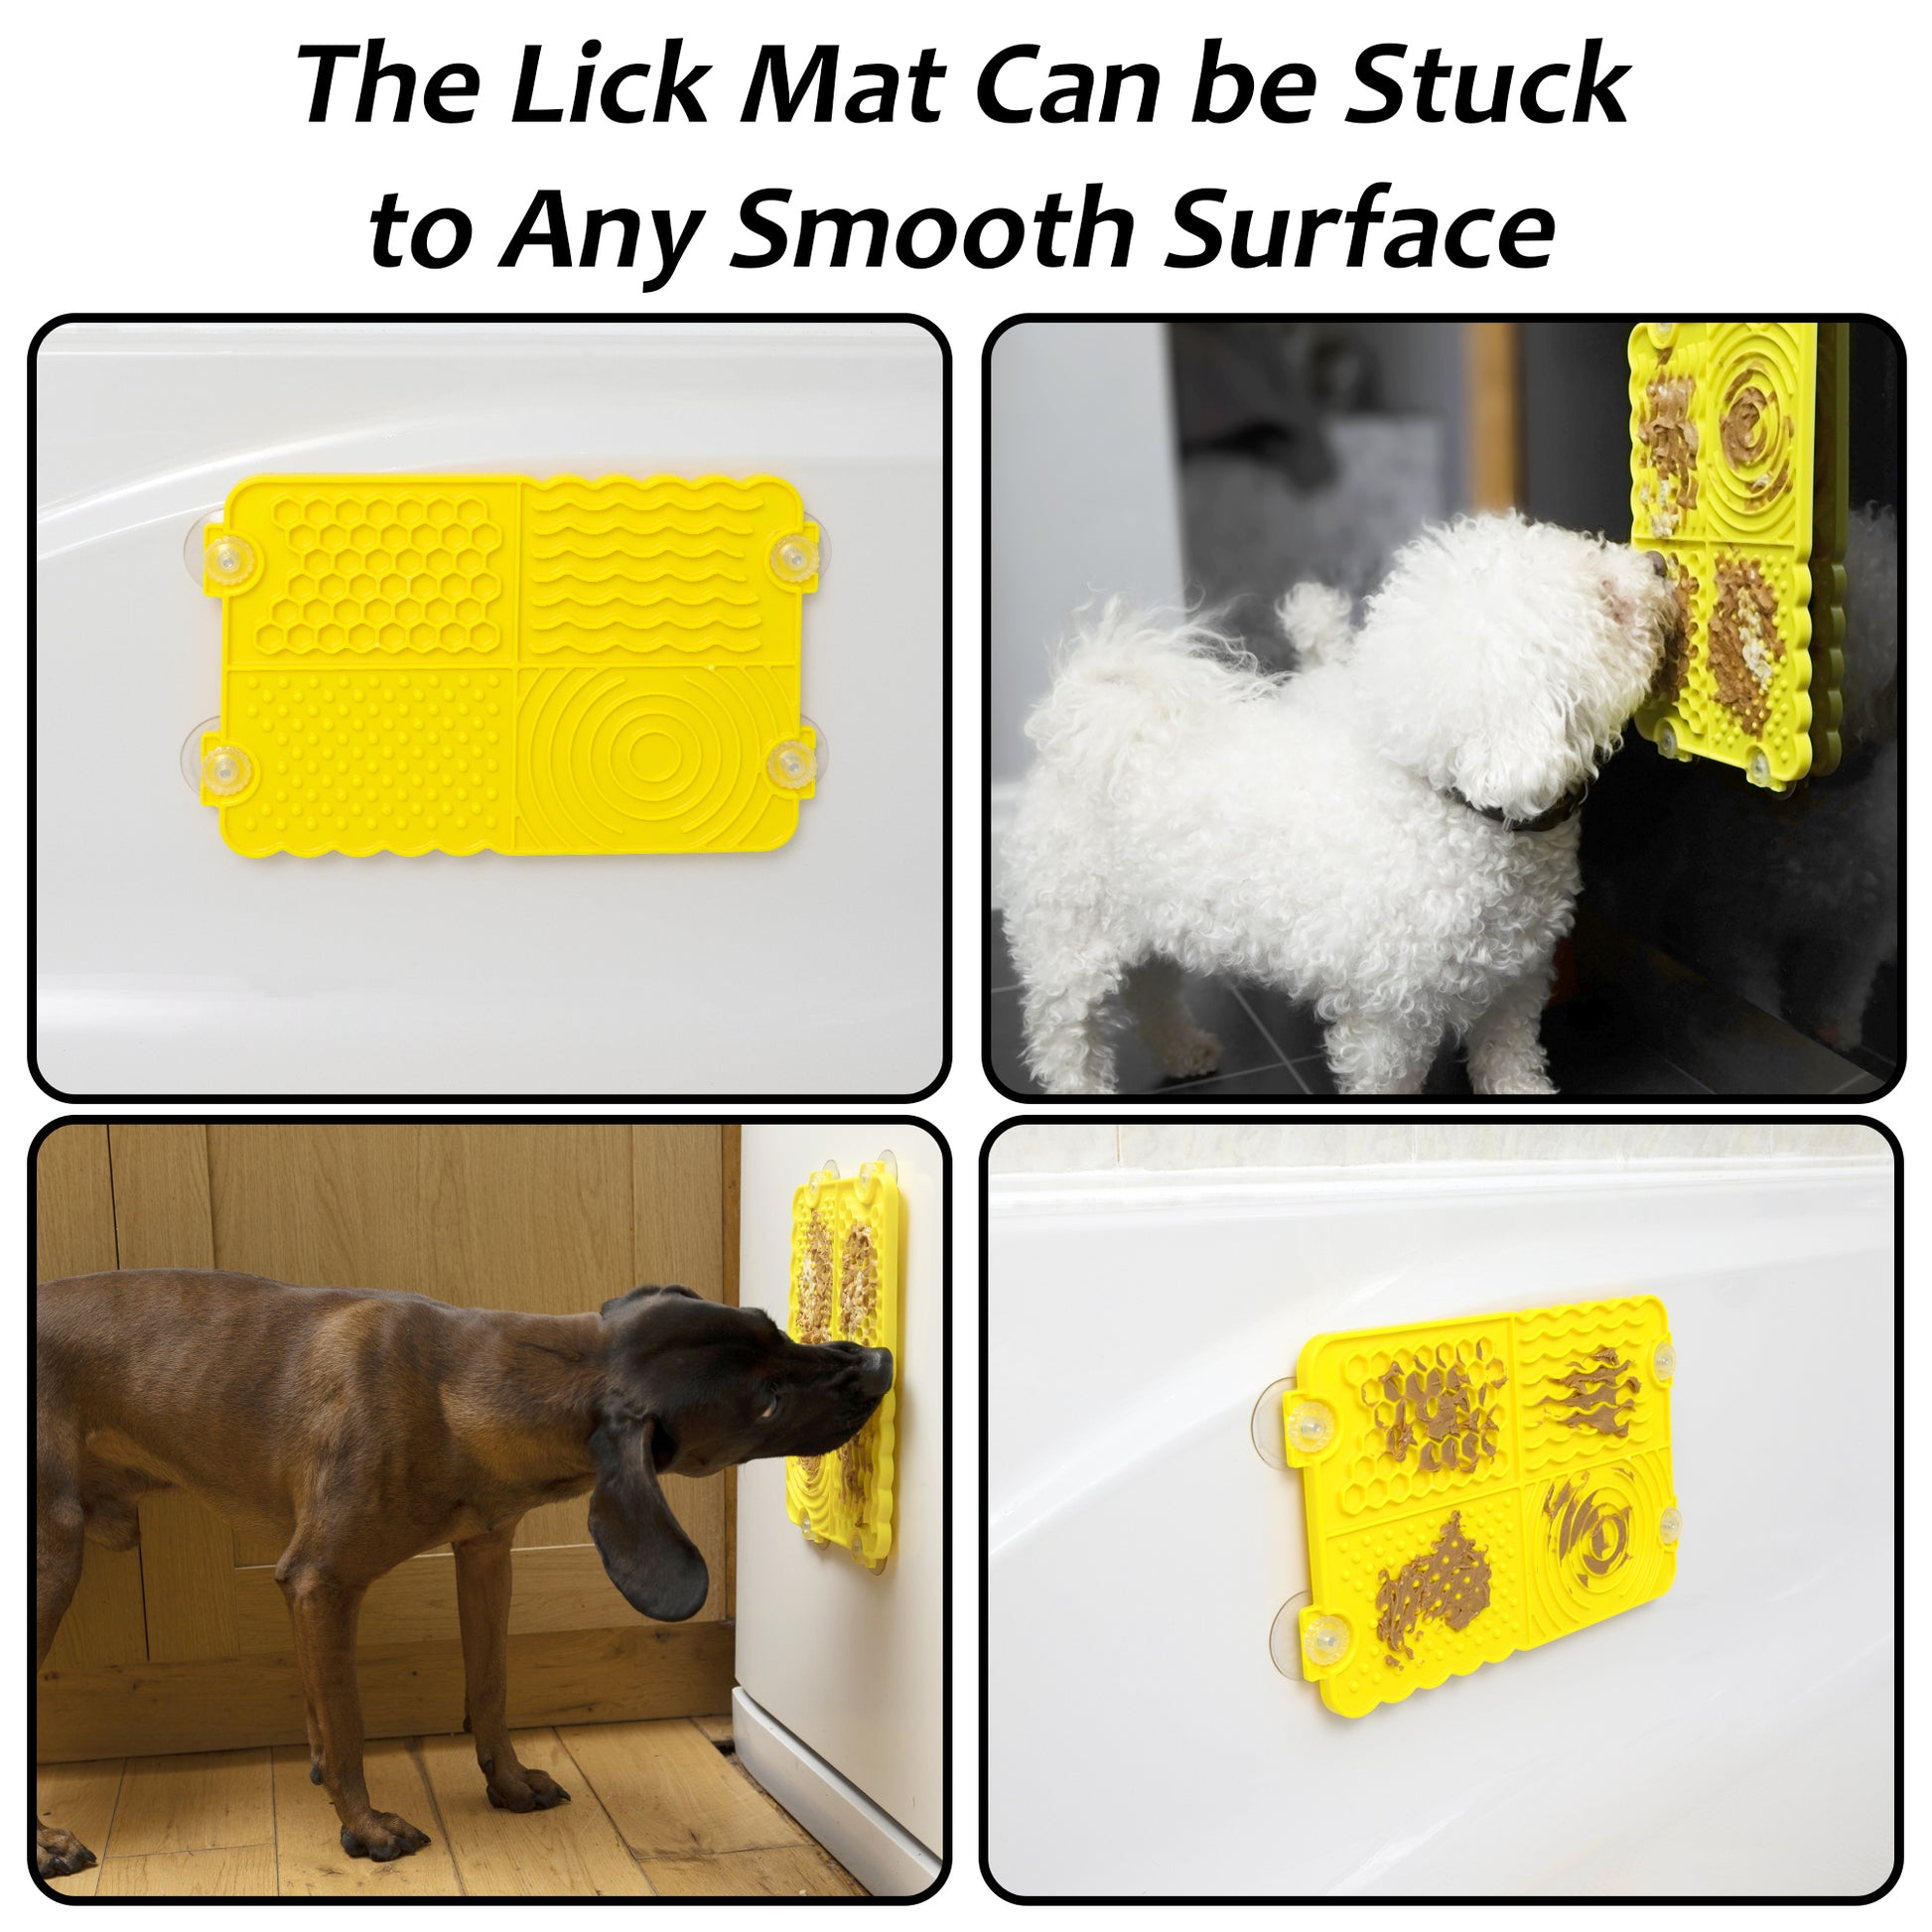 Pure Focus Lick Mats, Licking Toy for Dogs